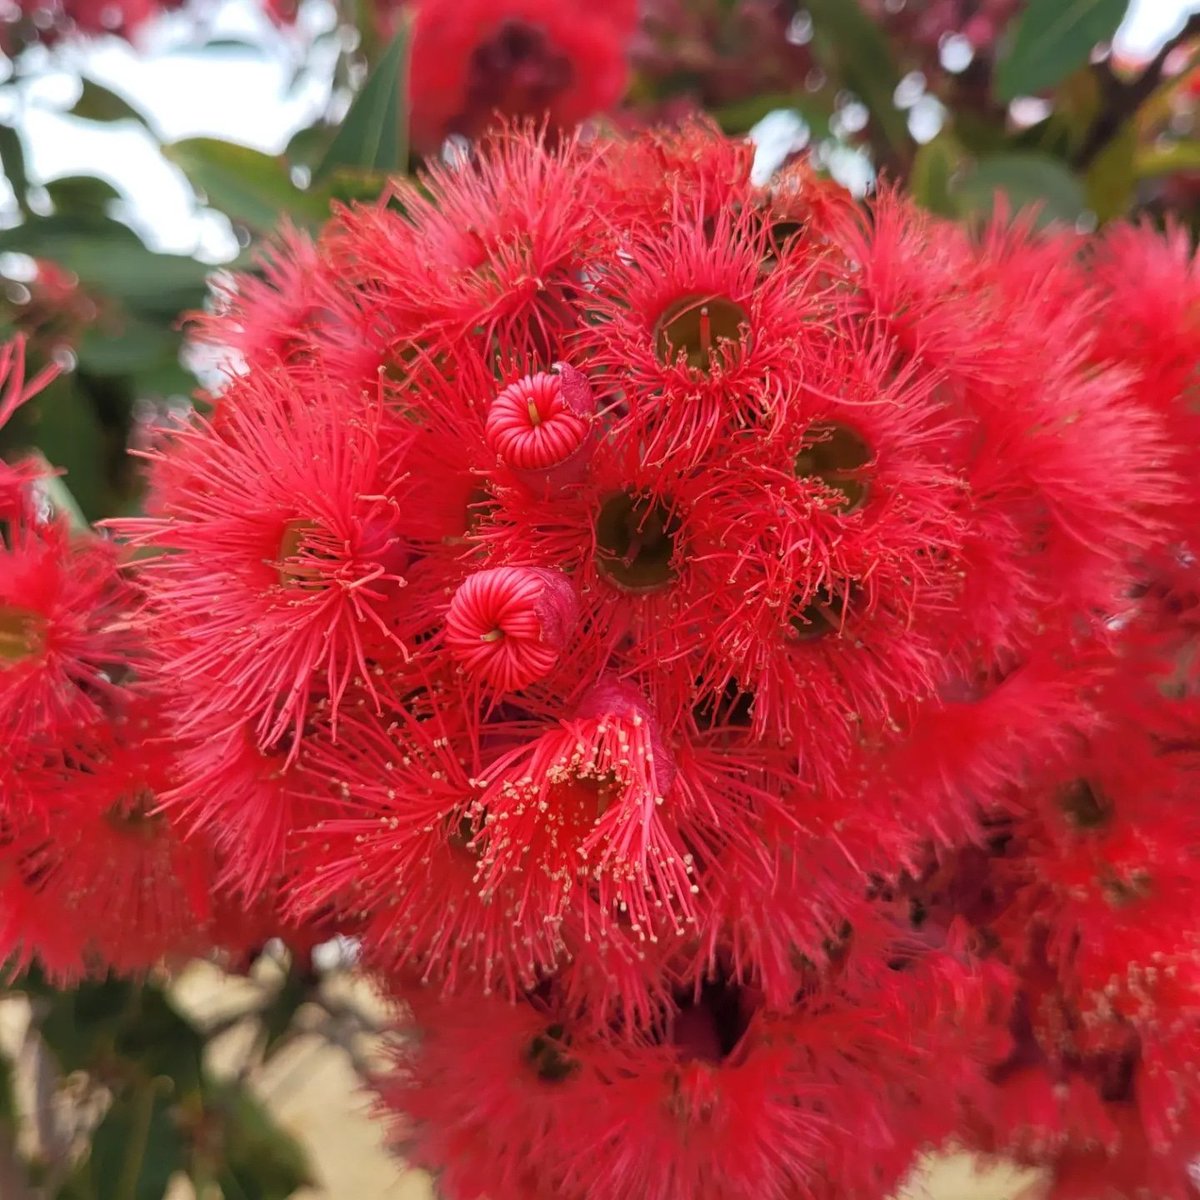 @LizJEdmonds The red flowering gum has moved beyond its natural distribution to become a global icon. The incredible floral displays light up the landscape during the summer. 

#loveagum #eucalyptoftheyear #eucbeaut